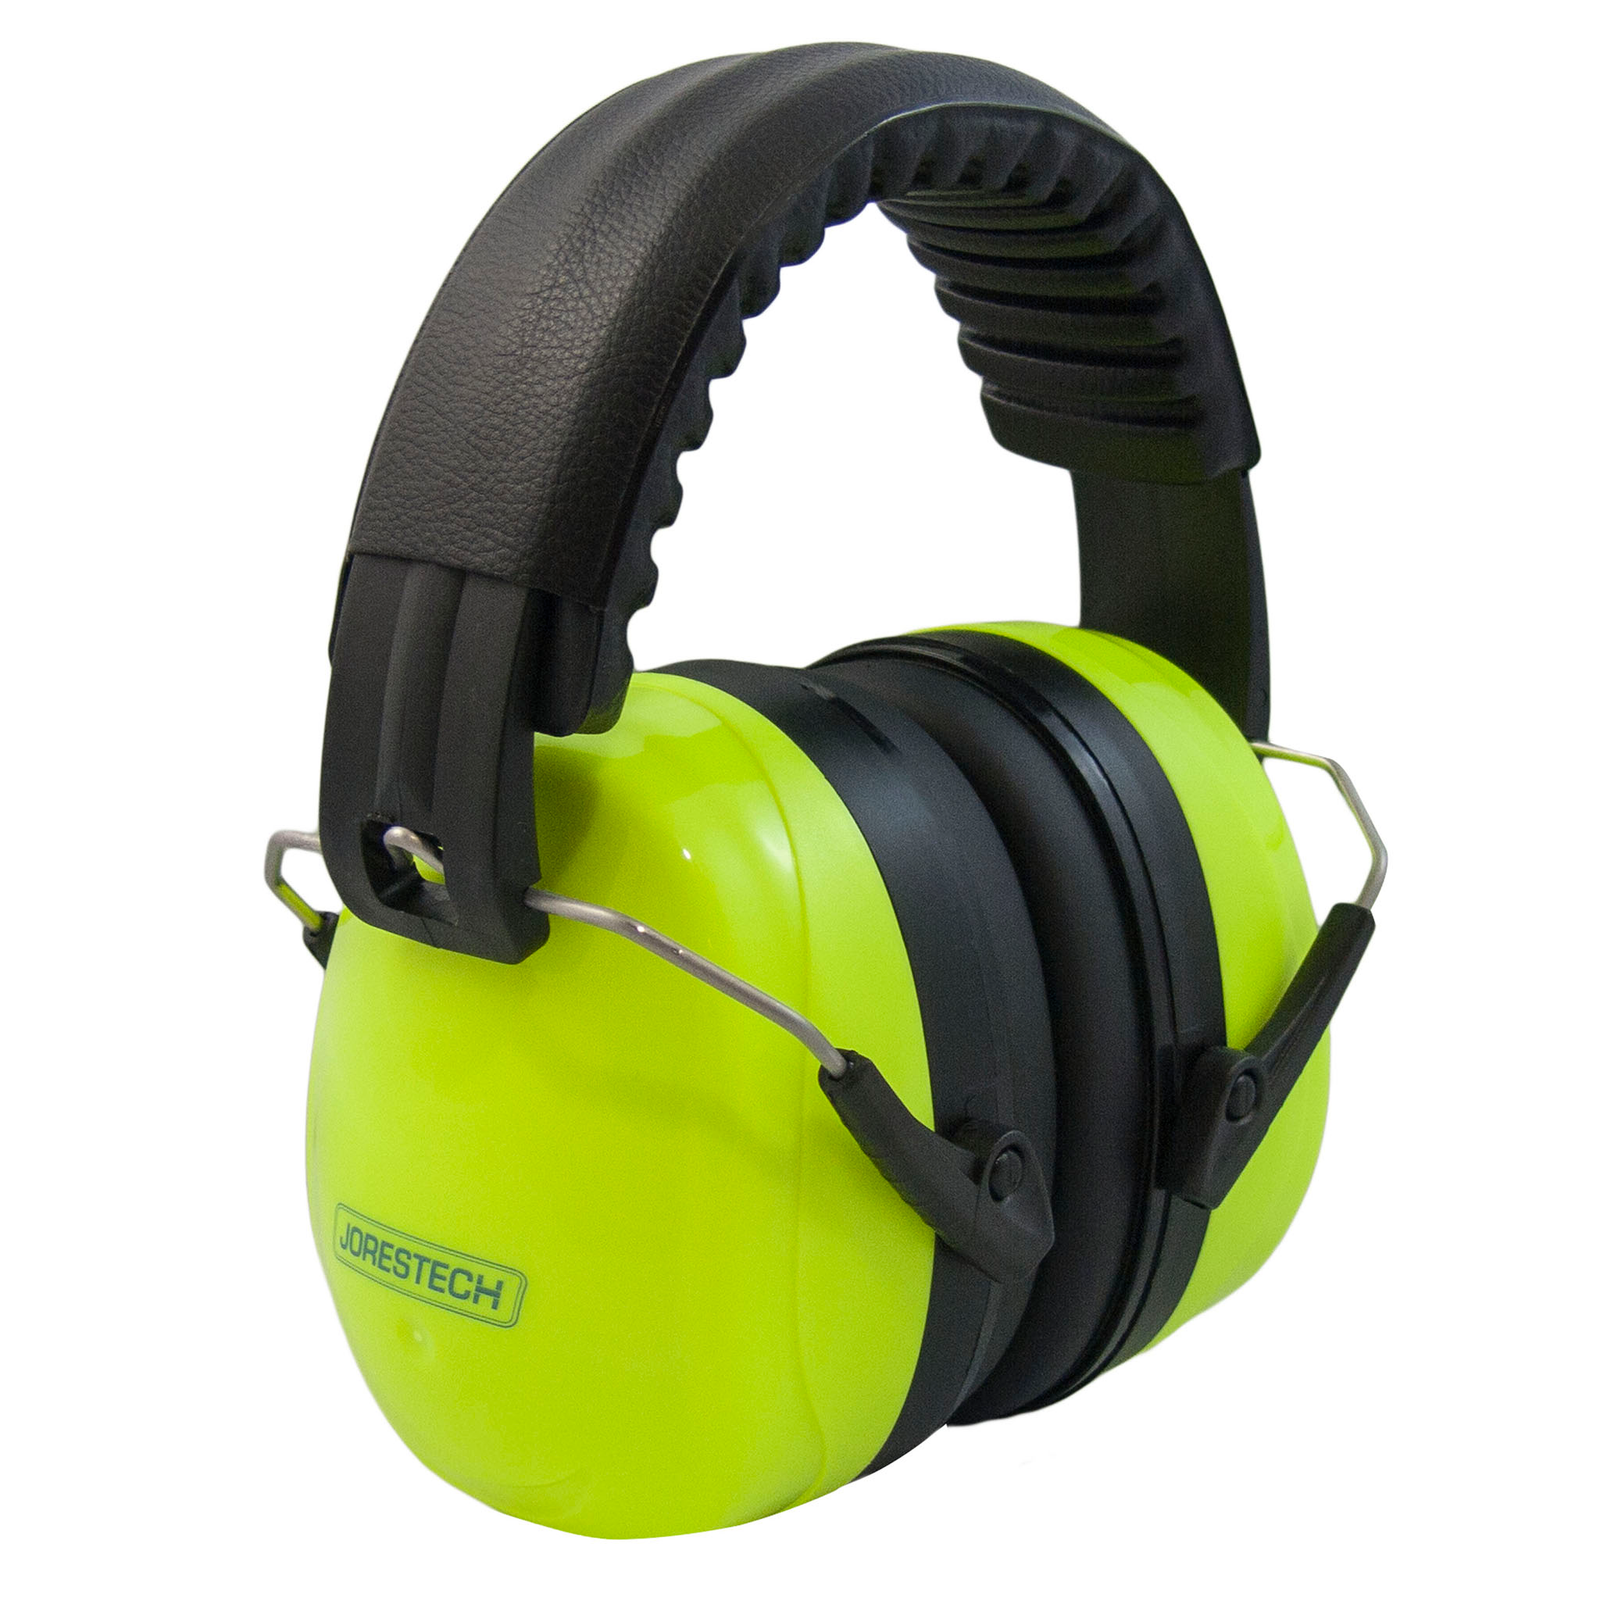 Diagonal view of the Lime ear muffs over white background